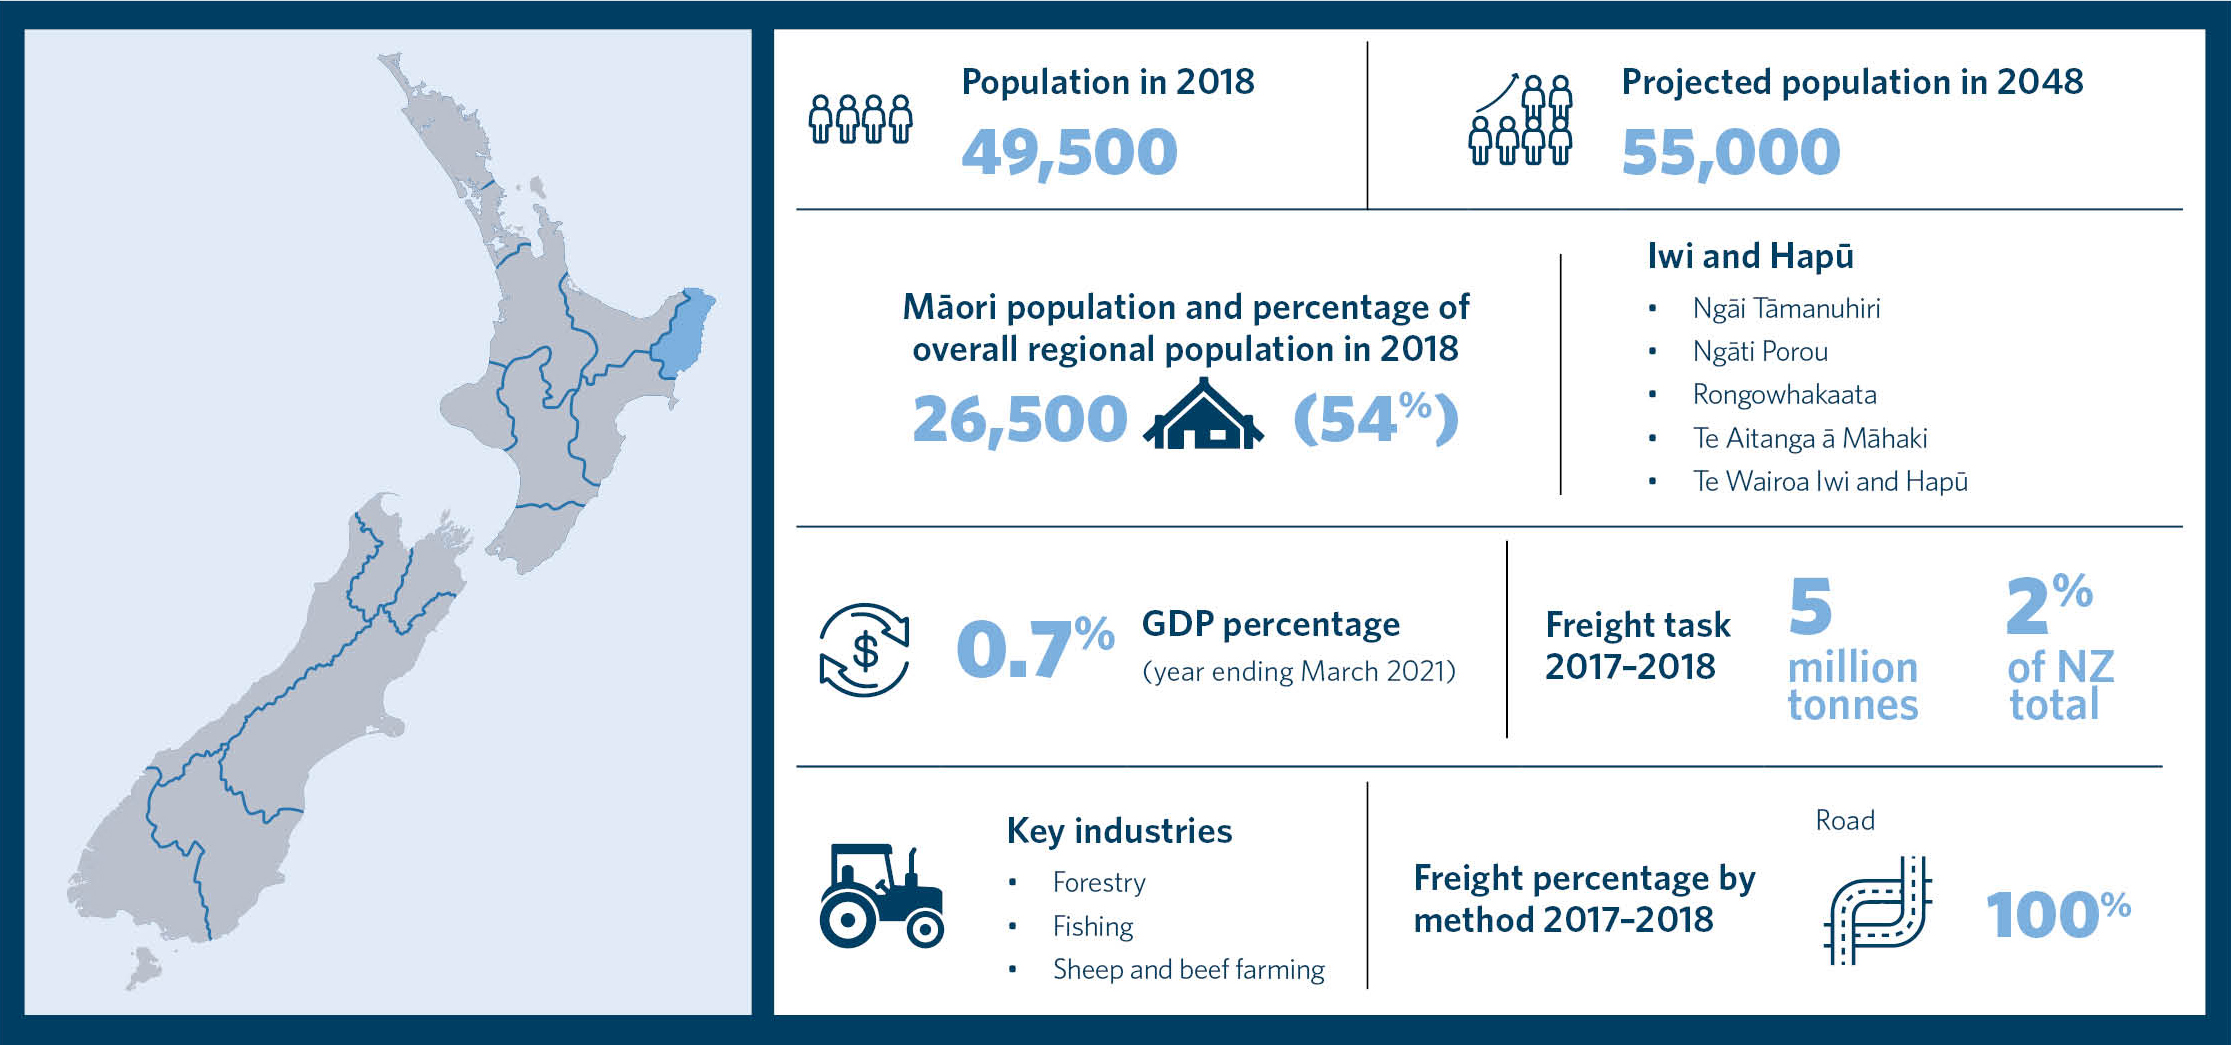 This is an infographic showing statistics for the region of Tairāwhiti Gisborne. It includes information about the population in 2018, projected population in 2048, Māori population and percentage of overall regional population in 2018, a list of iwi and 